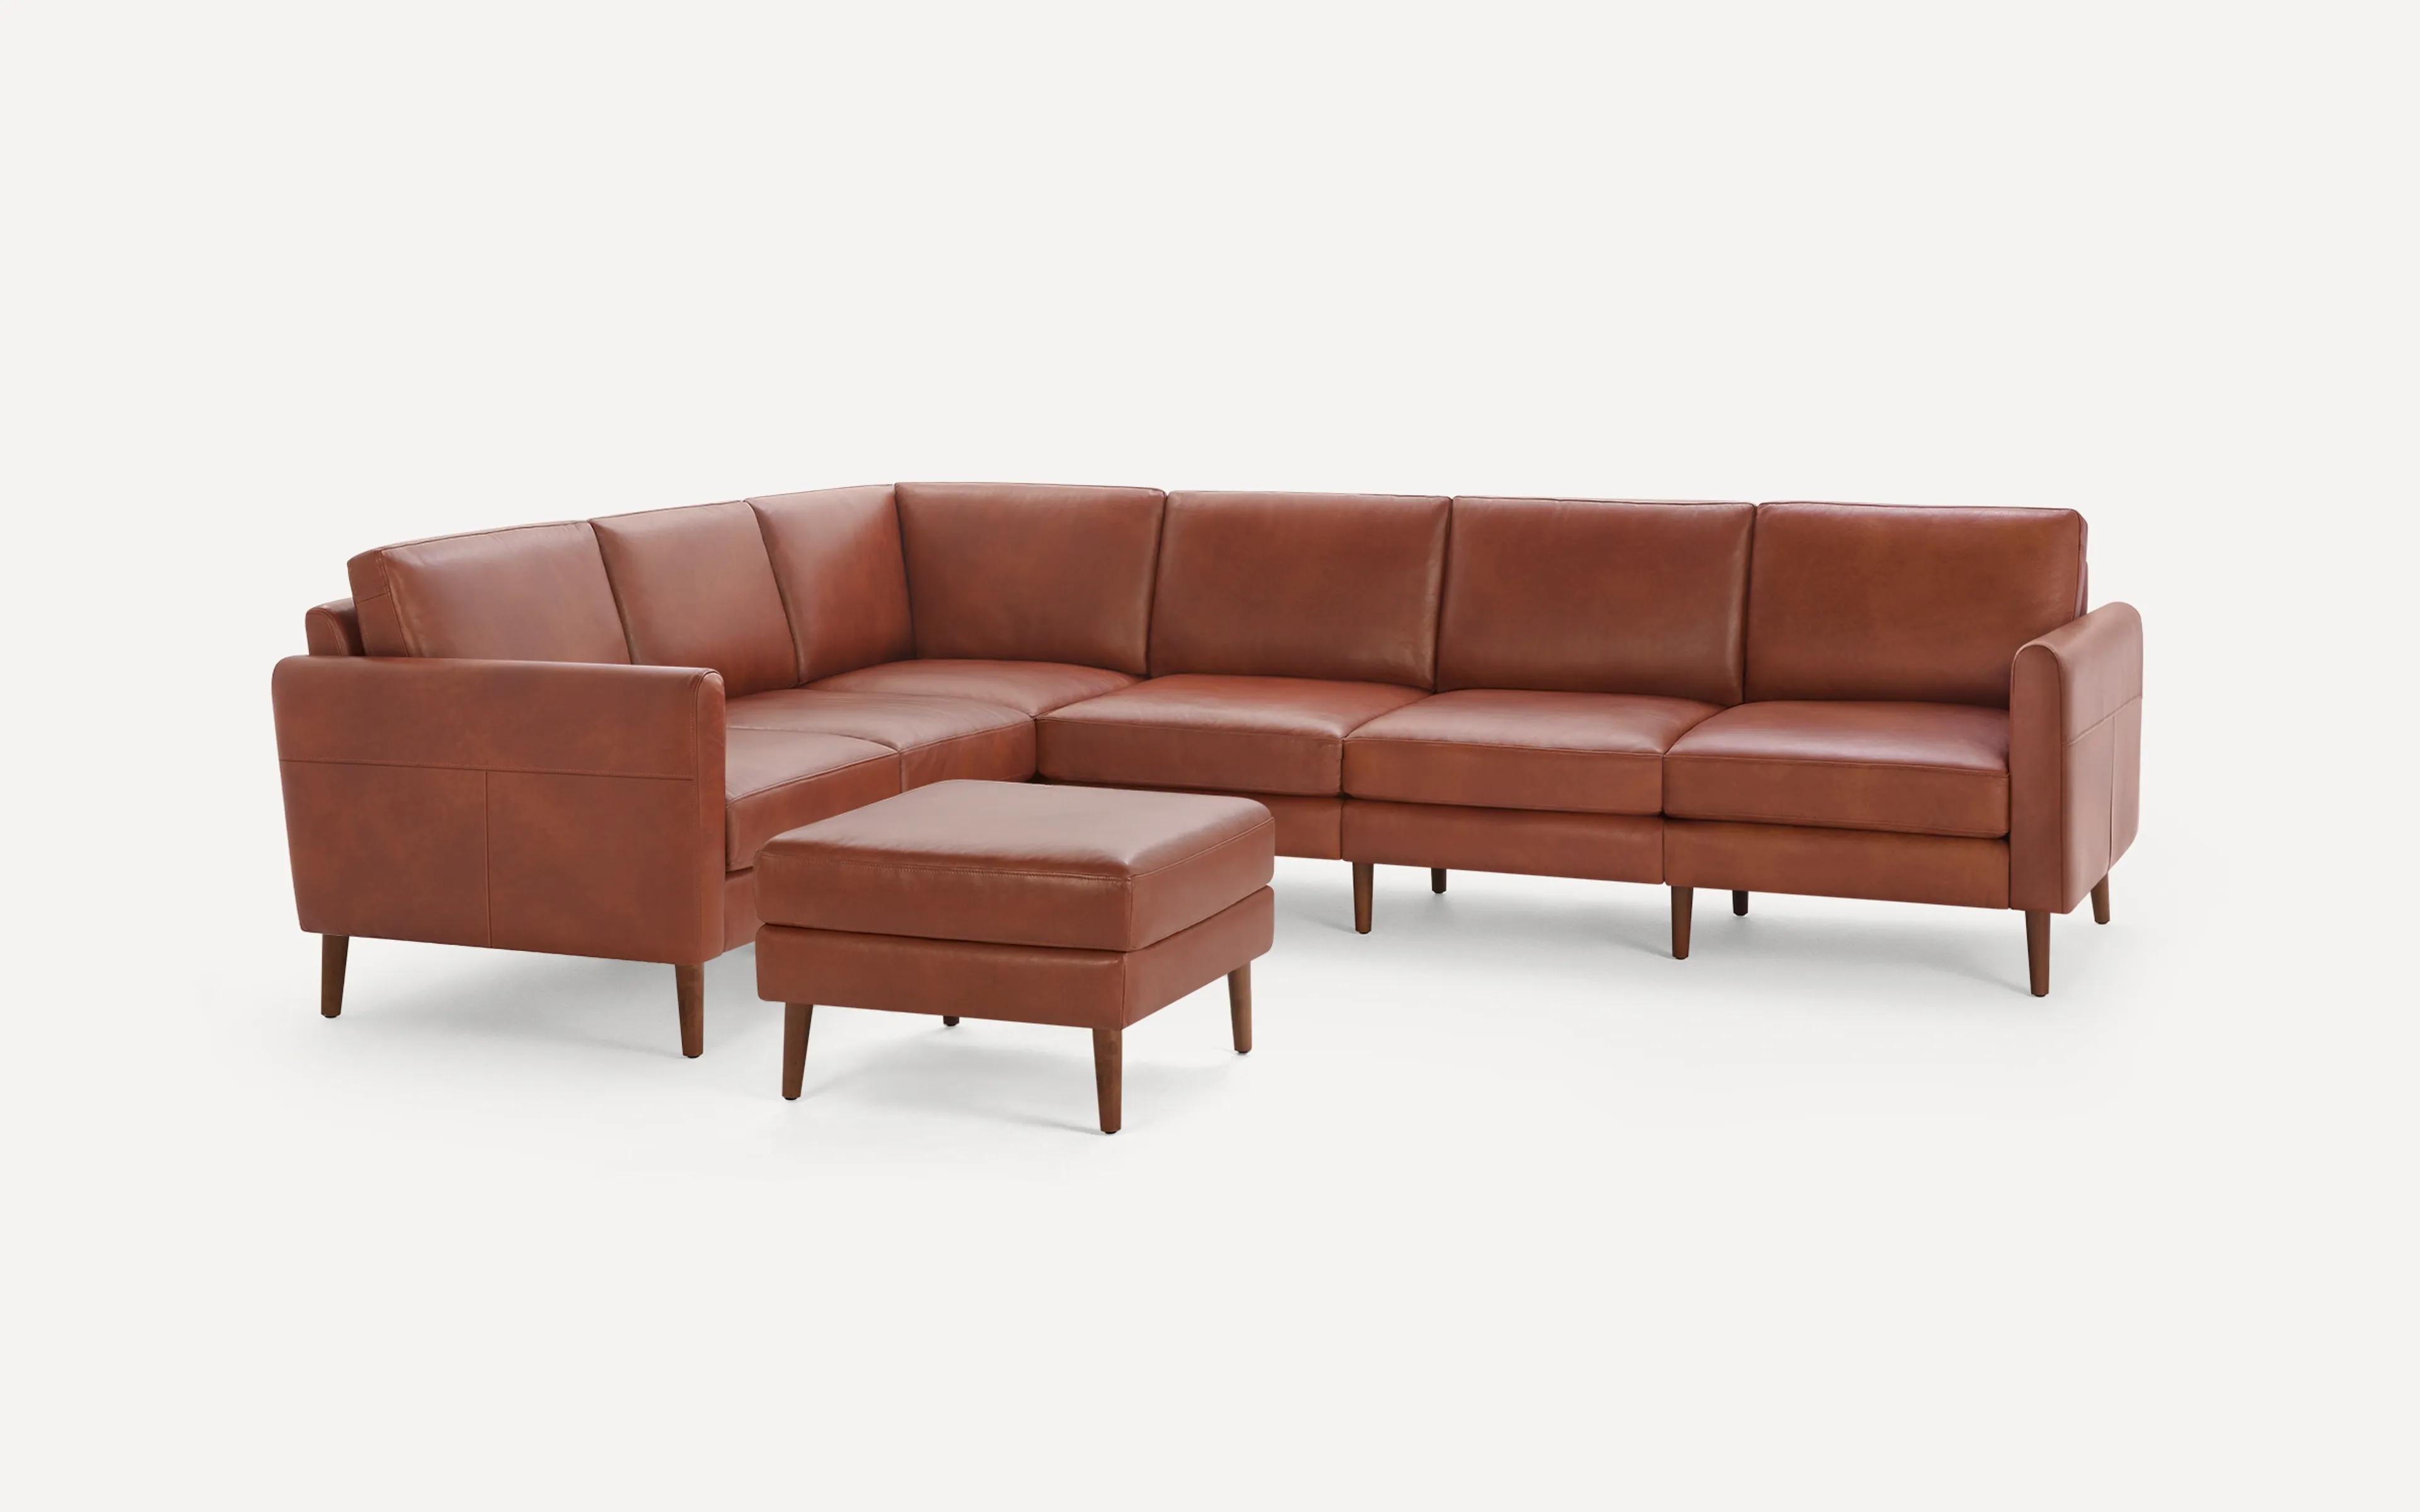 Arch Nomad Leather 6-Seat Corner Sectional with Ottoman